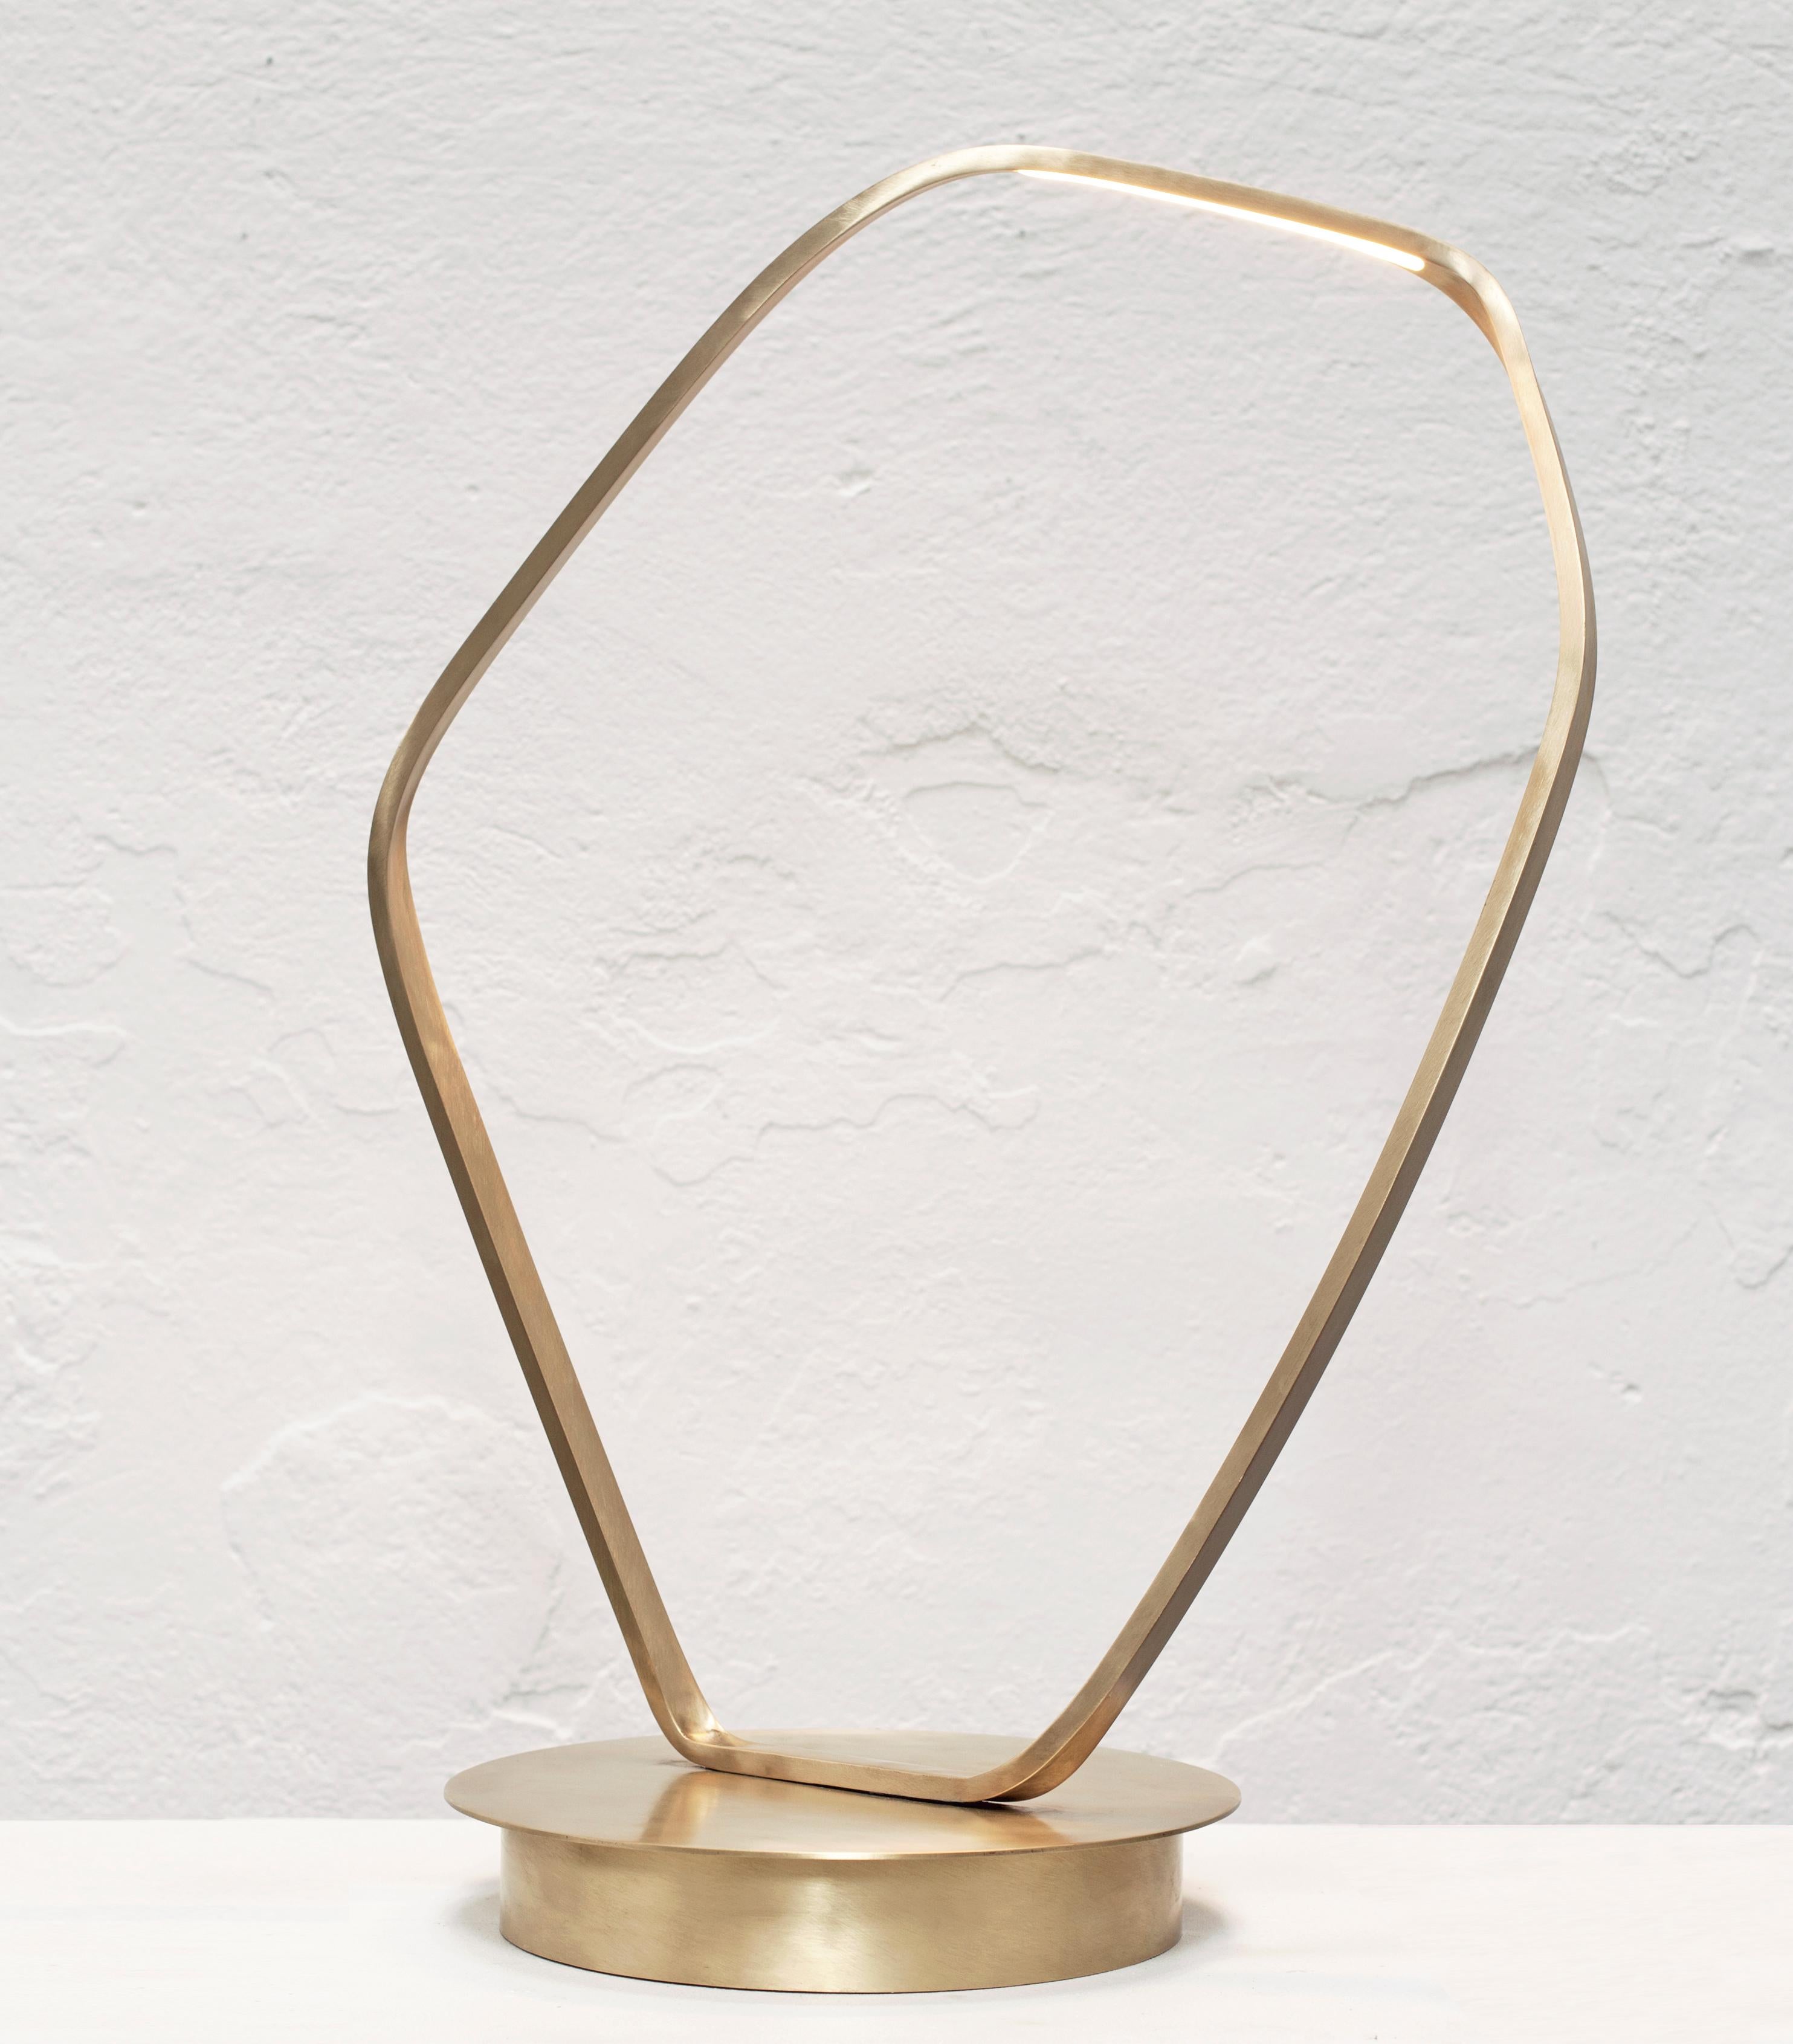 Italian Ophelia Brass Sculptural Table Lamp by Morghen Studio For Sale